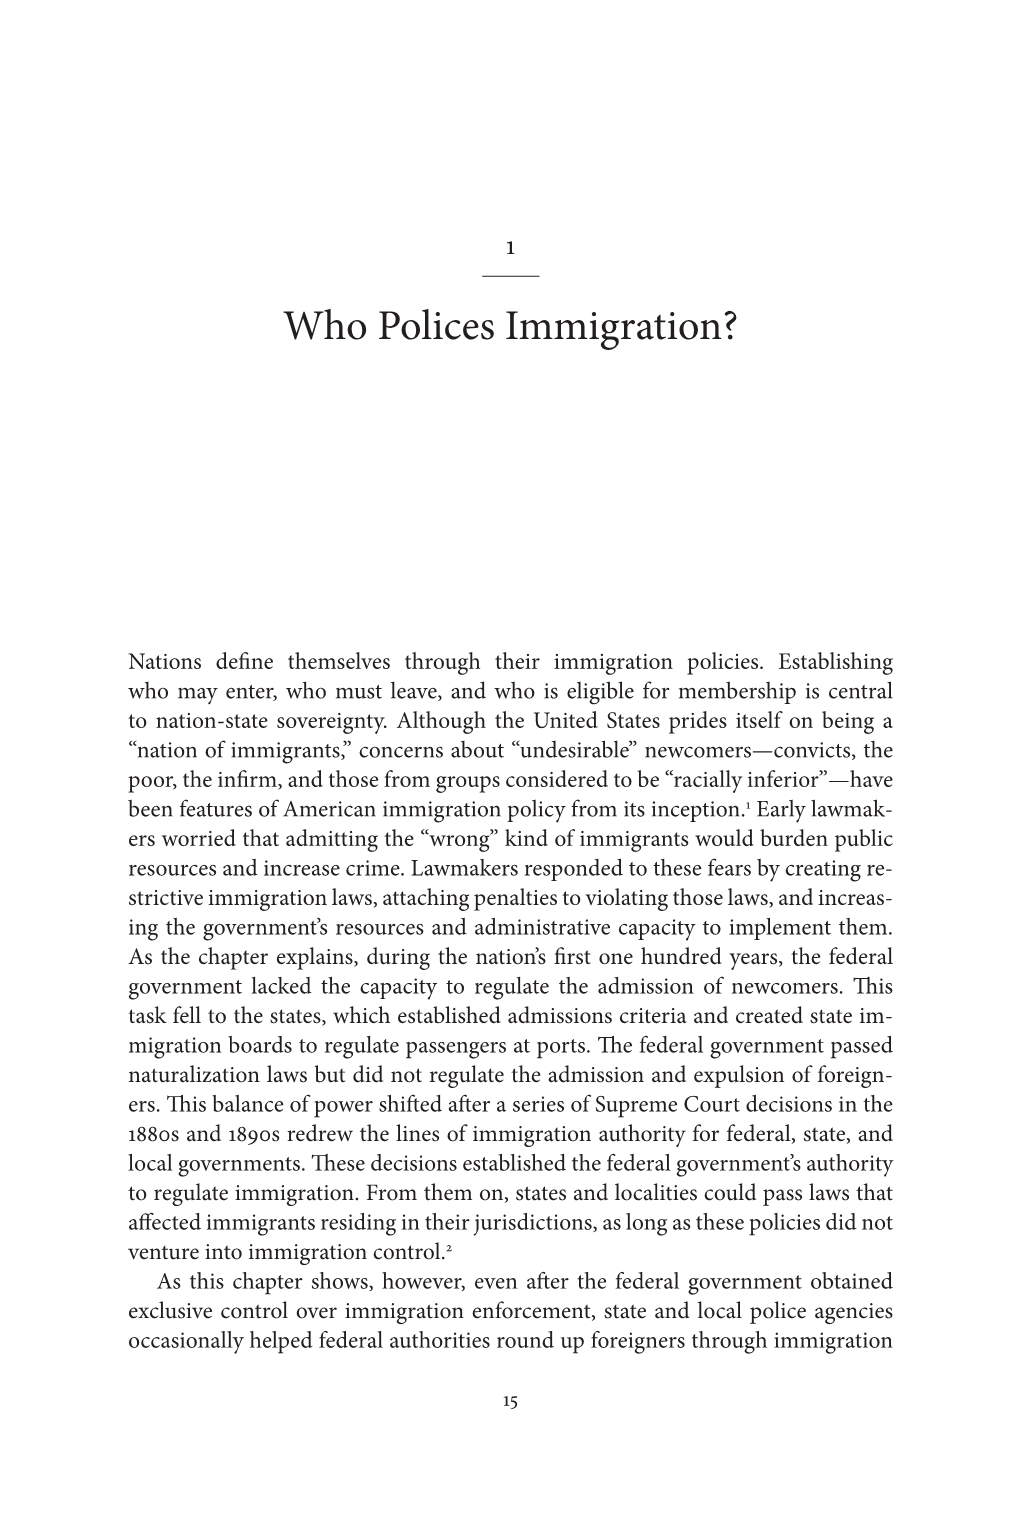 Who Polices Immigration?